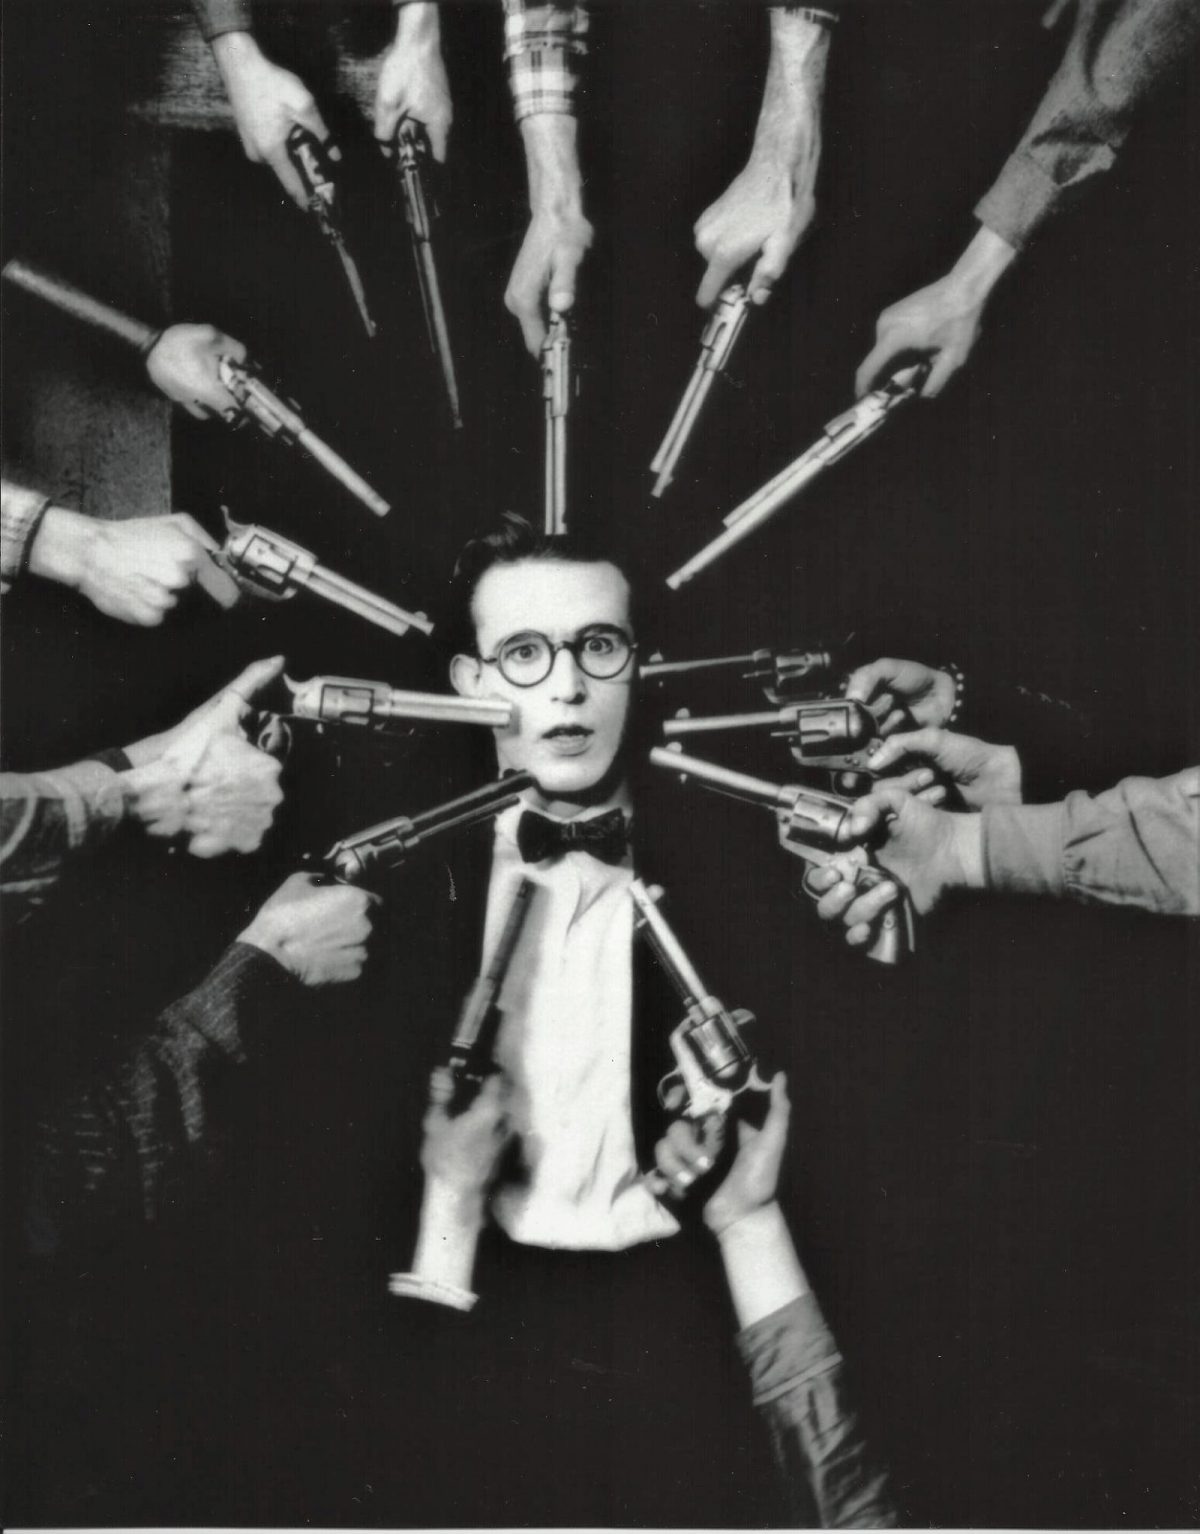 Harold Lloyd, Comedy, actors, 1920s, films, silent movies, movie stars, photography, Hollywood